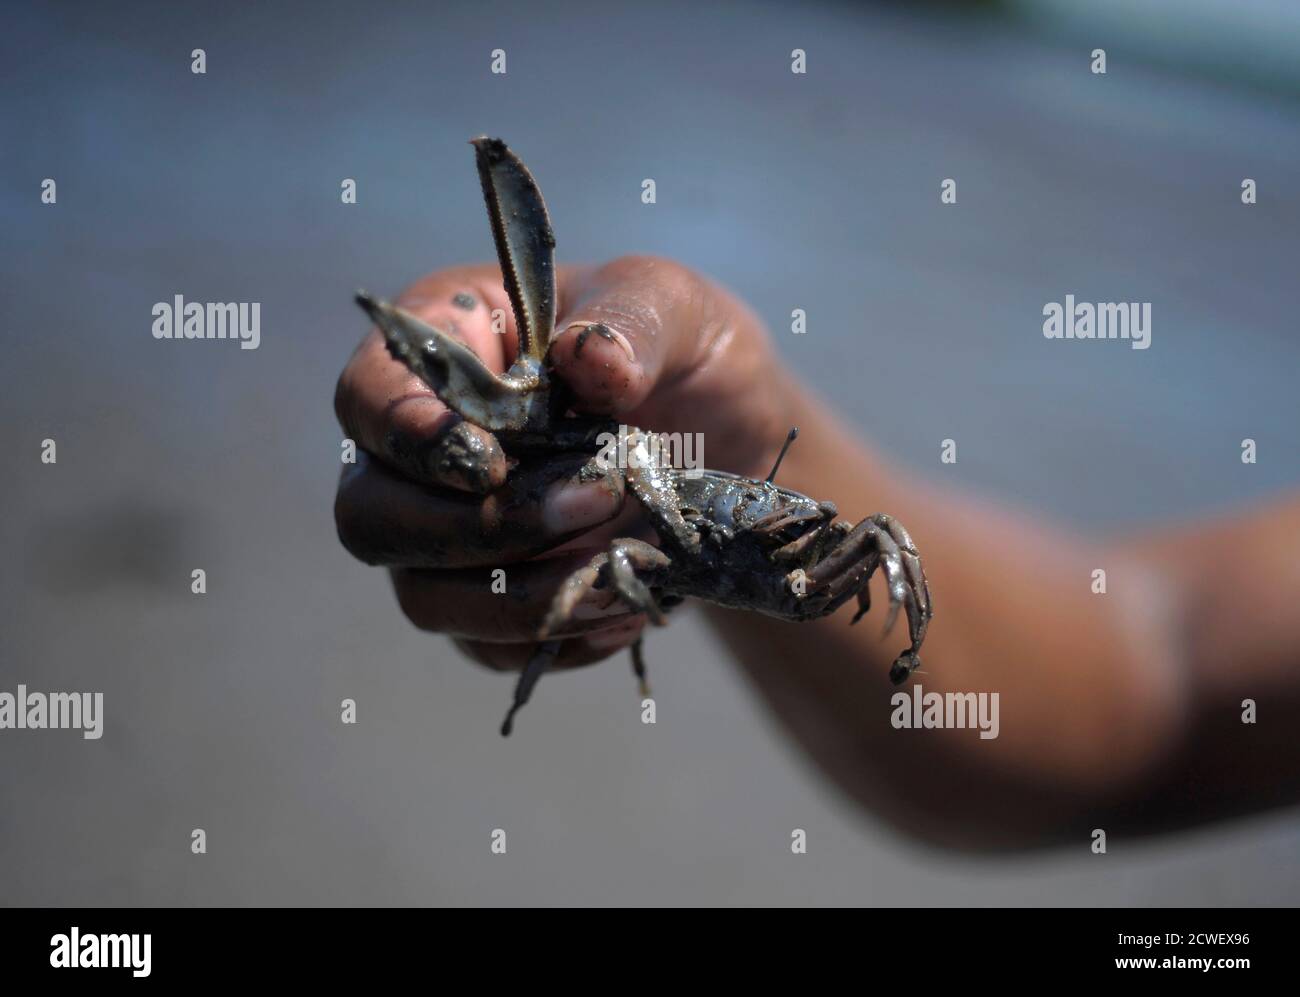 A man holds a crab, which he had dug out of the mud, in San Lorenzo, 110 km  (68 miles) southwest of Tegucigalpa June 24, 2012. These crabs, also known  as "canechos"